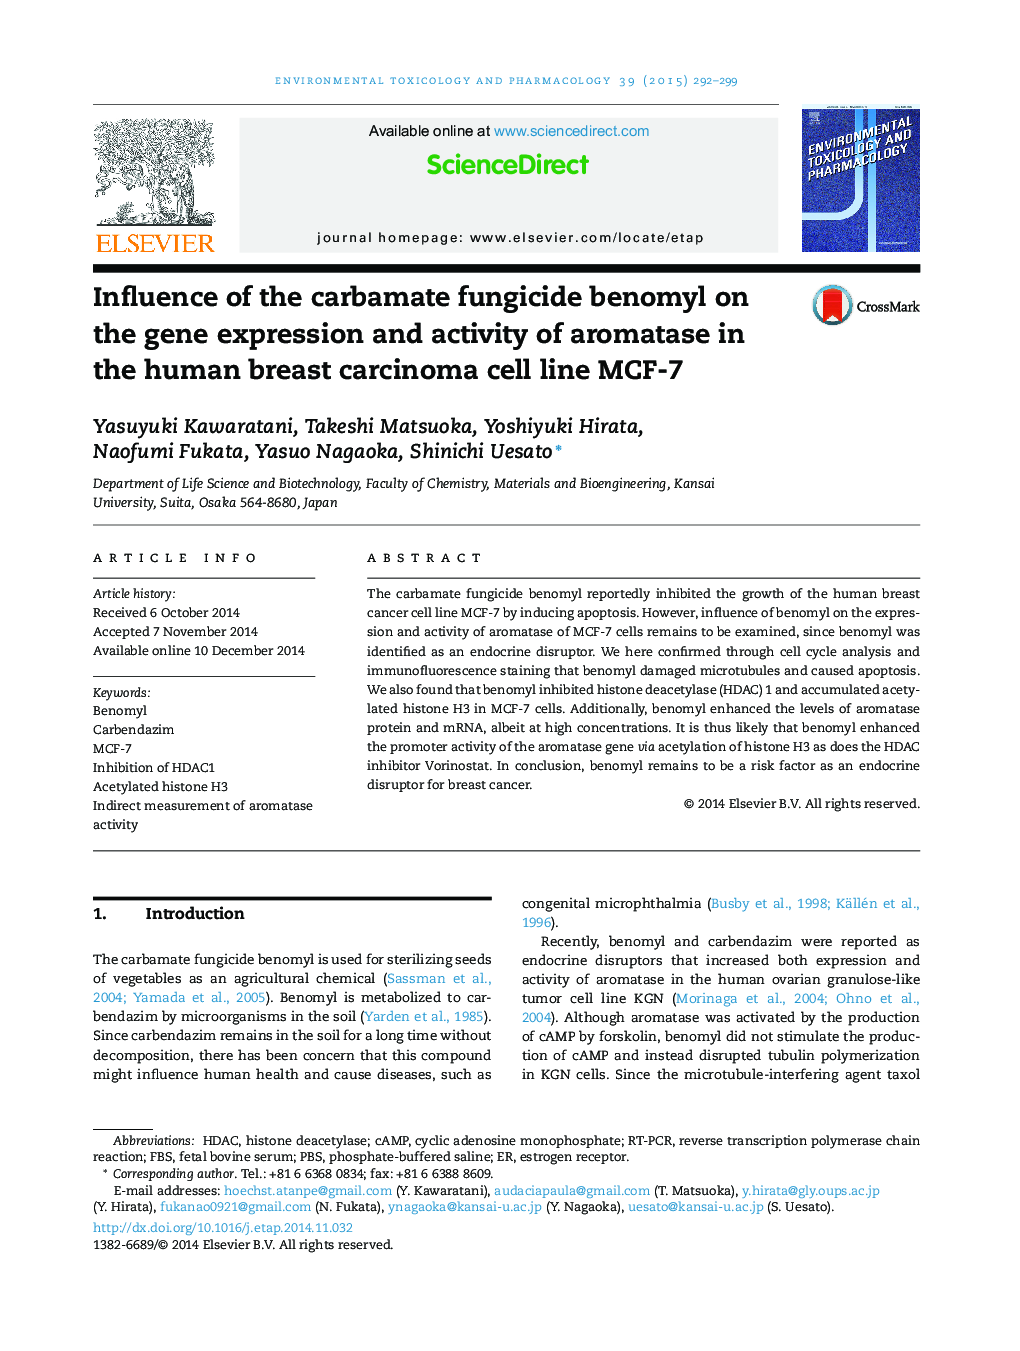 Influence of the carbamate fungicide benomyl on the gene expression and activity of aromatase in the human breast carcinoma cell line MCF-7